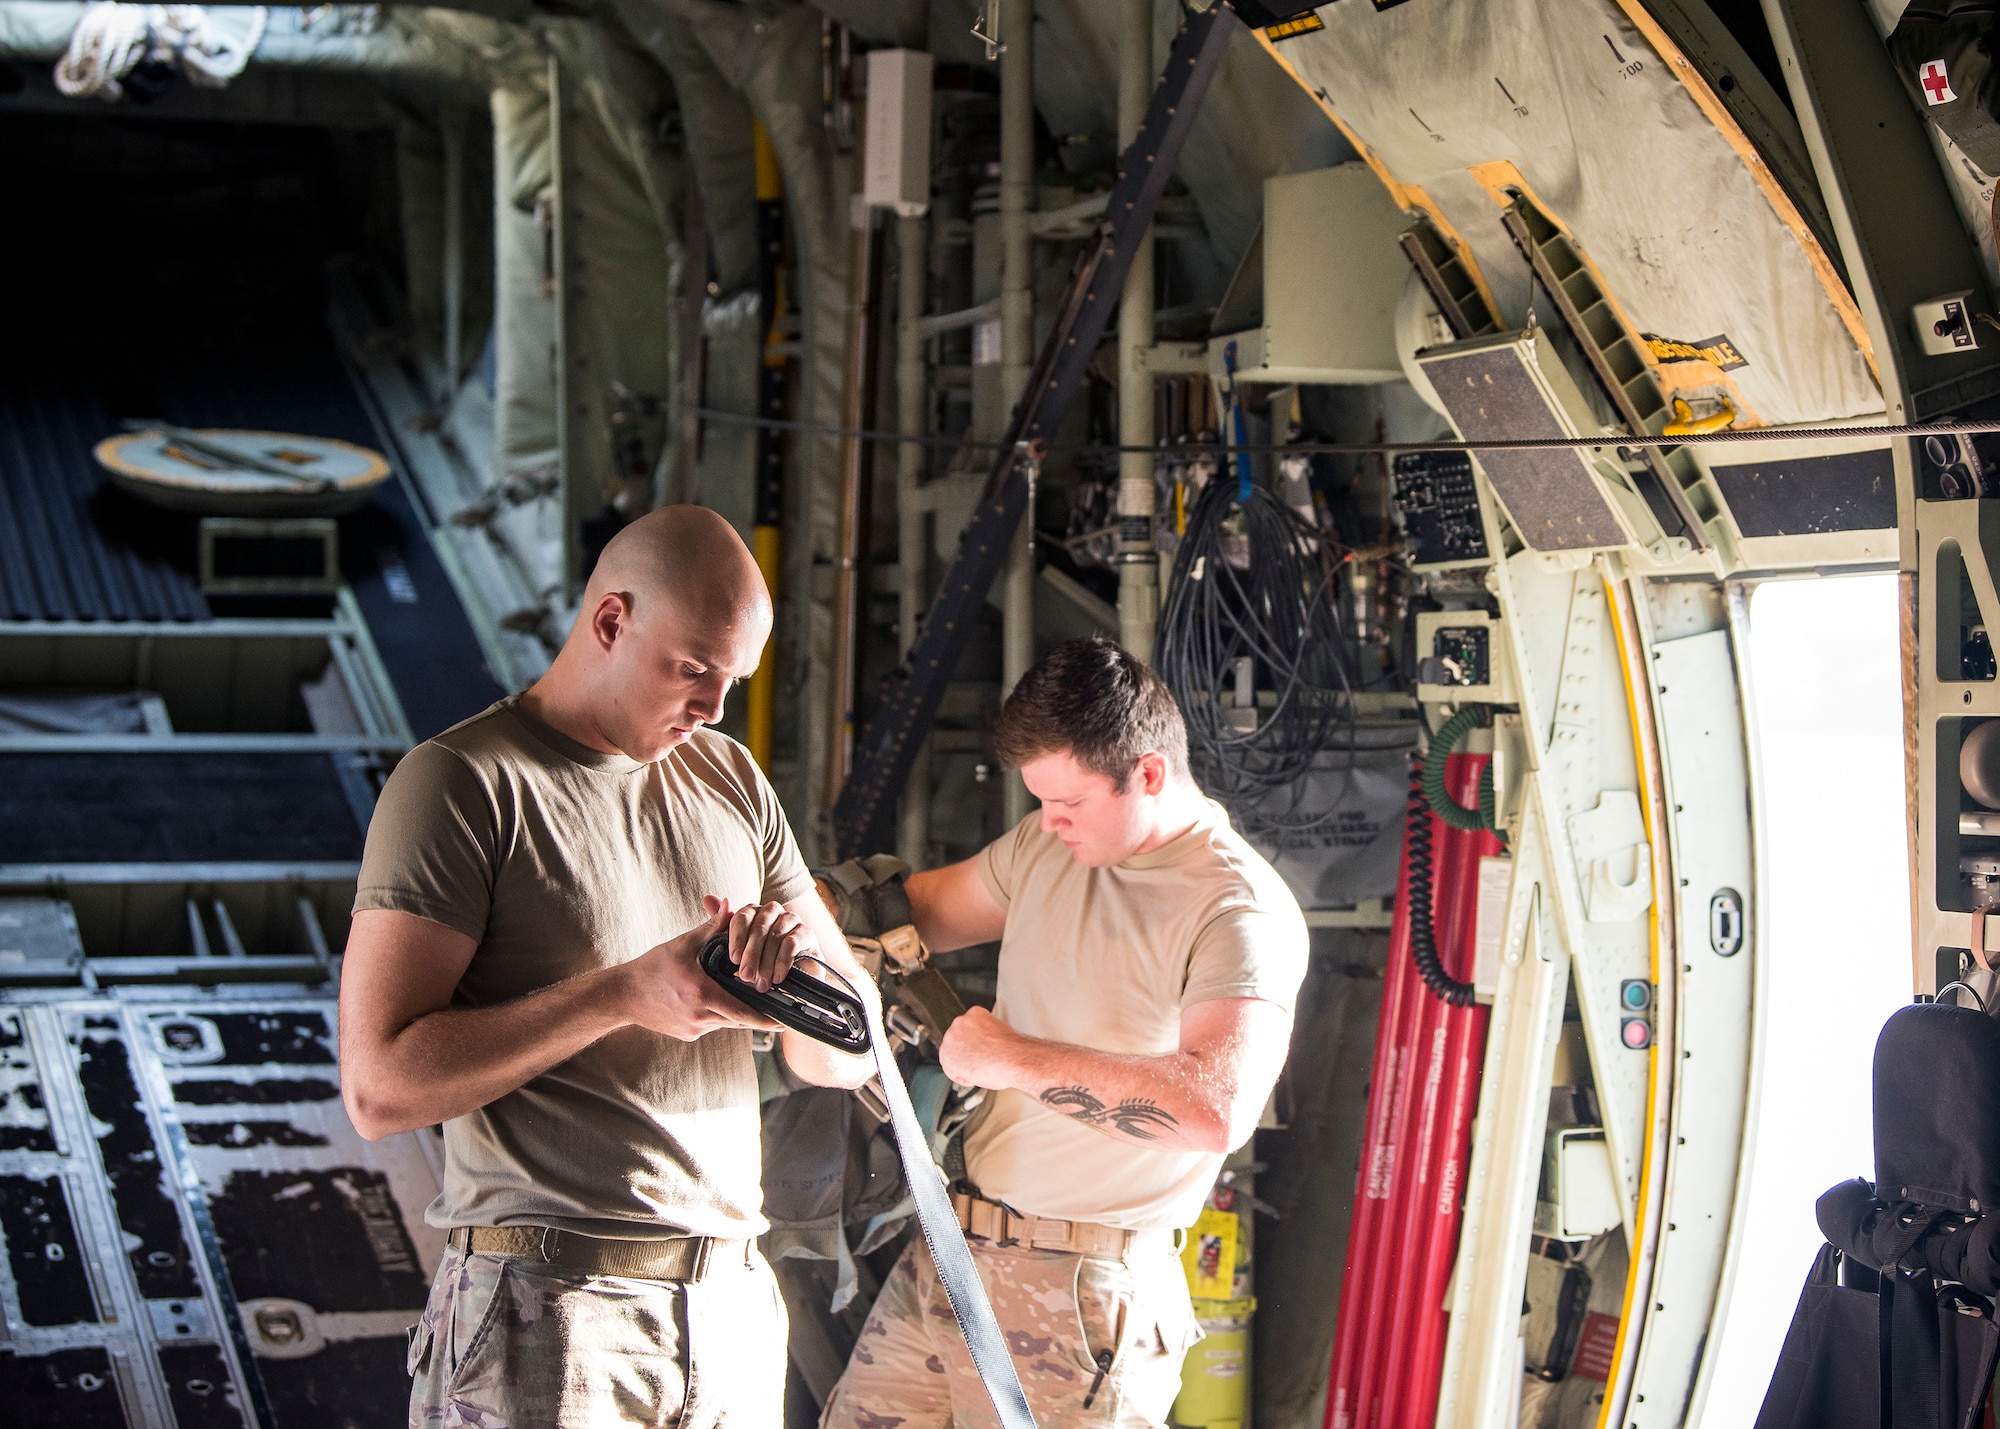 Airman 1st Class Gary Scott, left, 347th Operations Support Squadron aircrew flight equipment apprentice, performs a pre-flight inspection, Aug. 13, 2019, at Moody Air Force Base, Ga. Airmen from the 71st Aircraft Maintenance Unit and other supporting units perform various tasks prior to takeoff to ensure the aircraft is performing optimally to complete its mission of supporting the 71st Rescue Squadron. Those tasks consist of: pre-flight inspection, removing plugs and cover, repairing any problems found during crew pre-flight checks as well as marshaling the aircraft for take-off. (U.S. Air Force photo by Airman 1st Class Eugene Oliver)